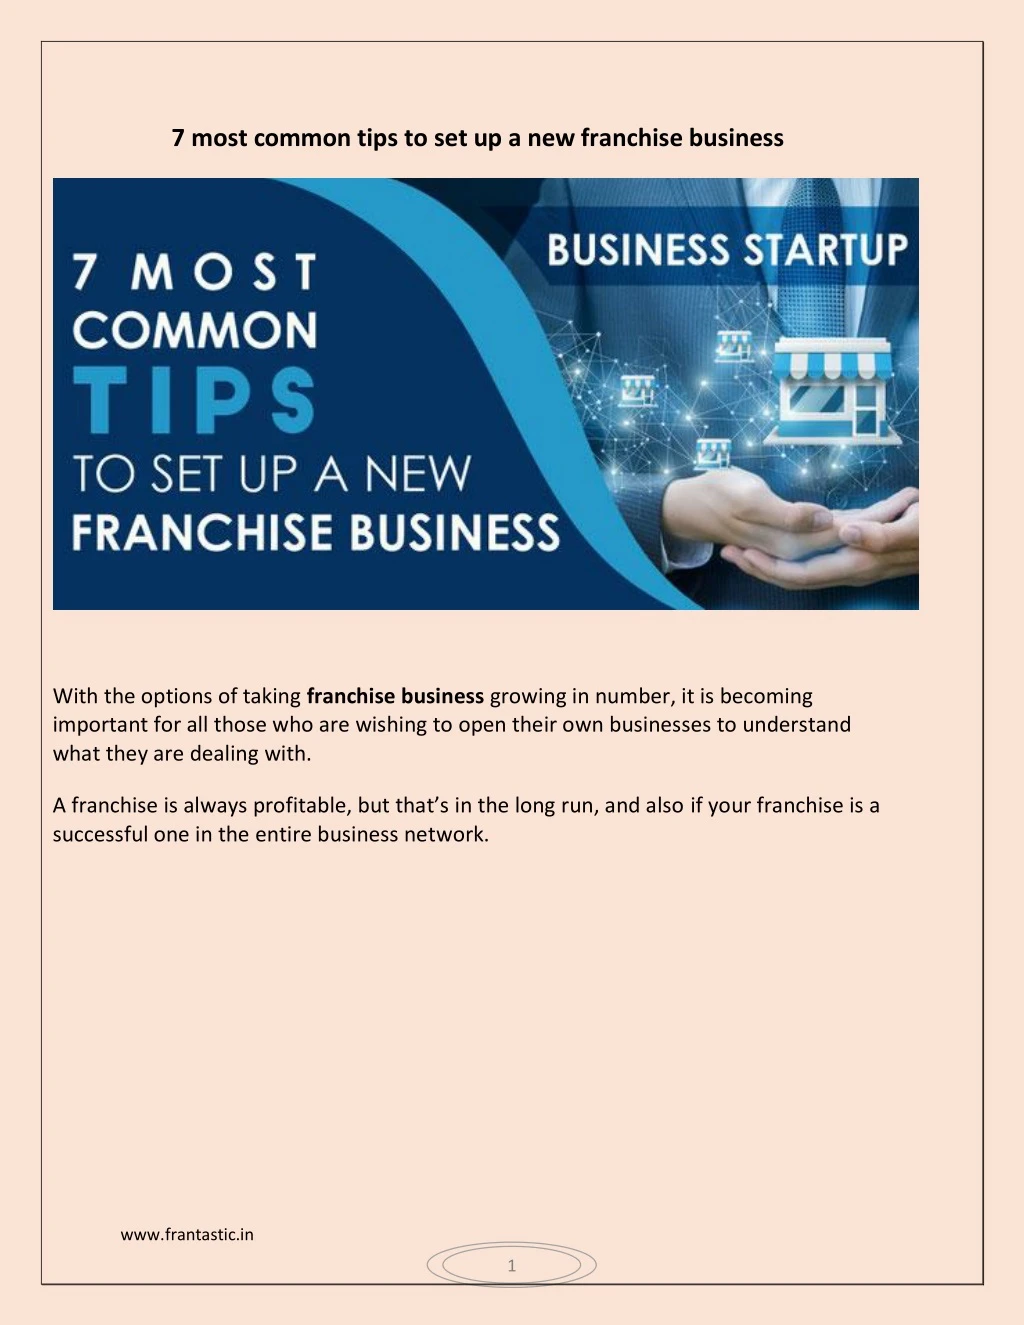 7 most common tips to set up a new franchise